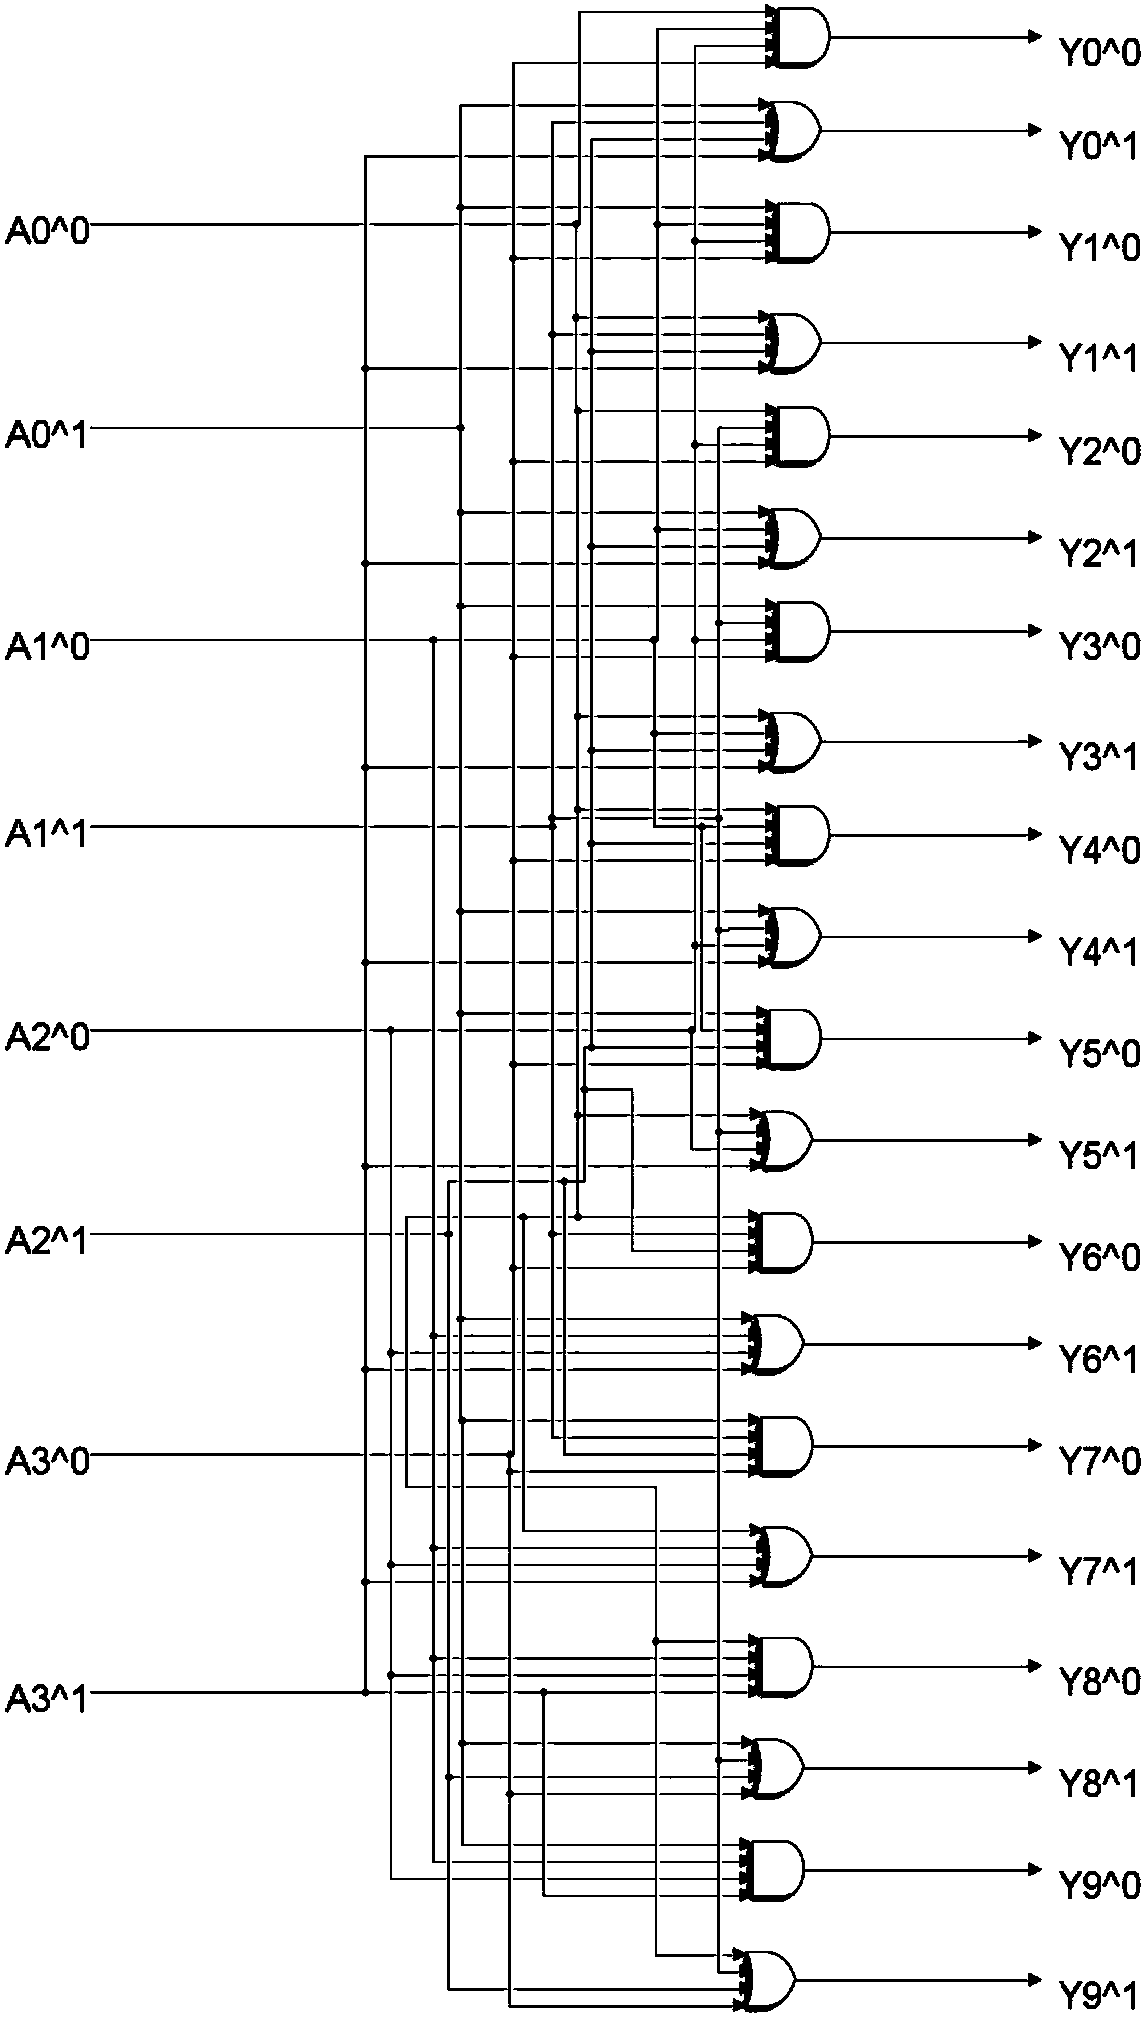 Design Method of 4-10 Decoder Based on DNA Strand Replacement